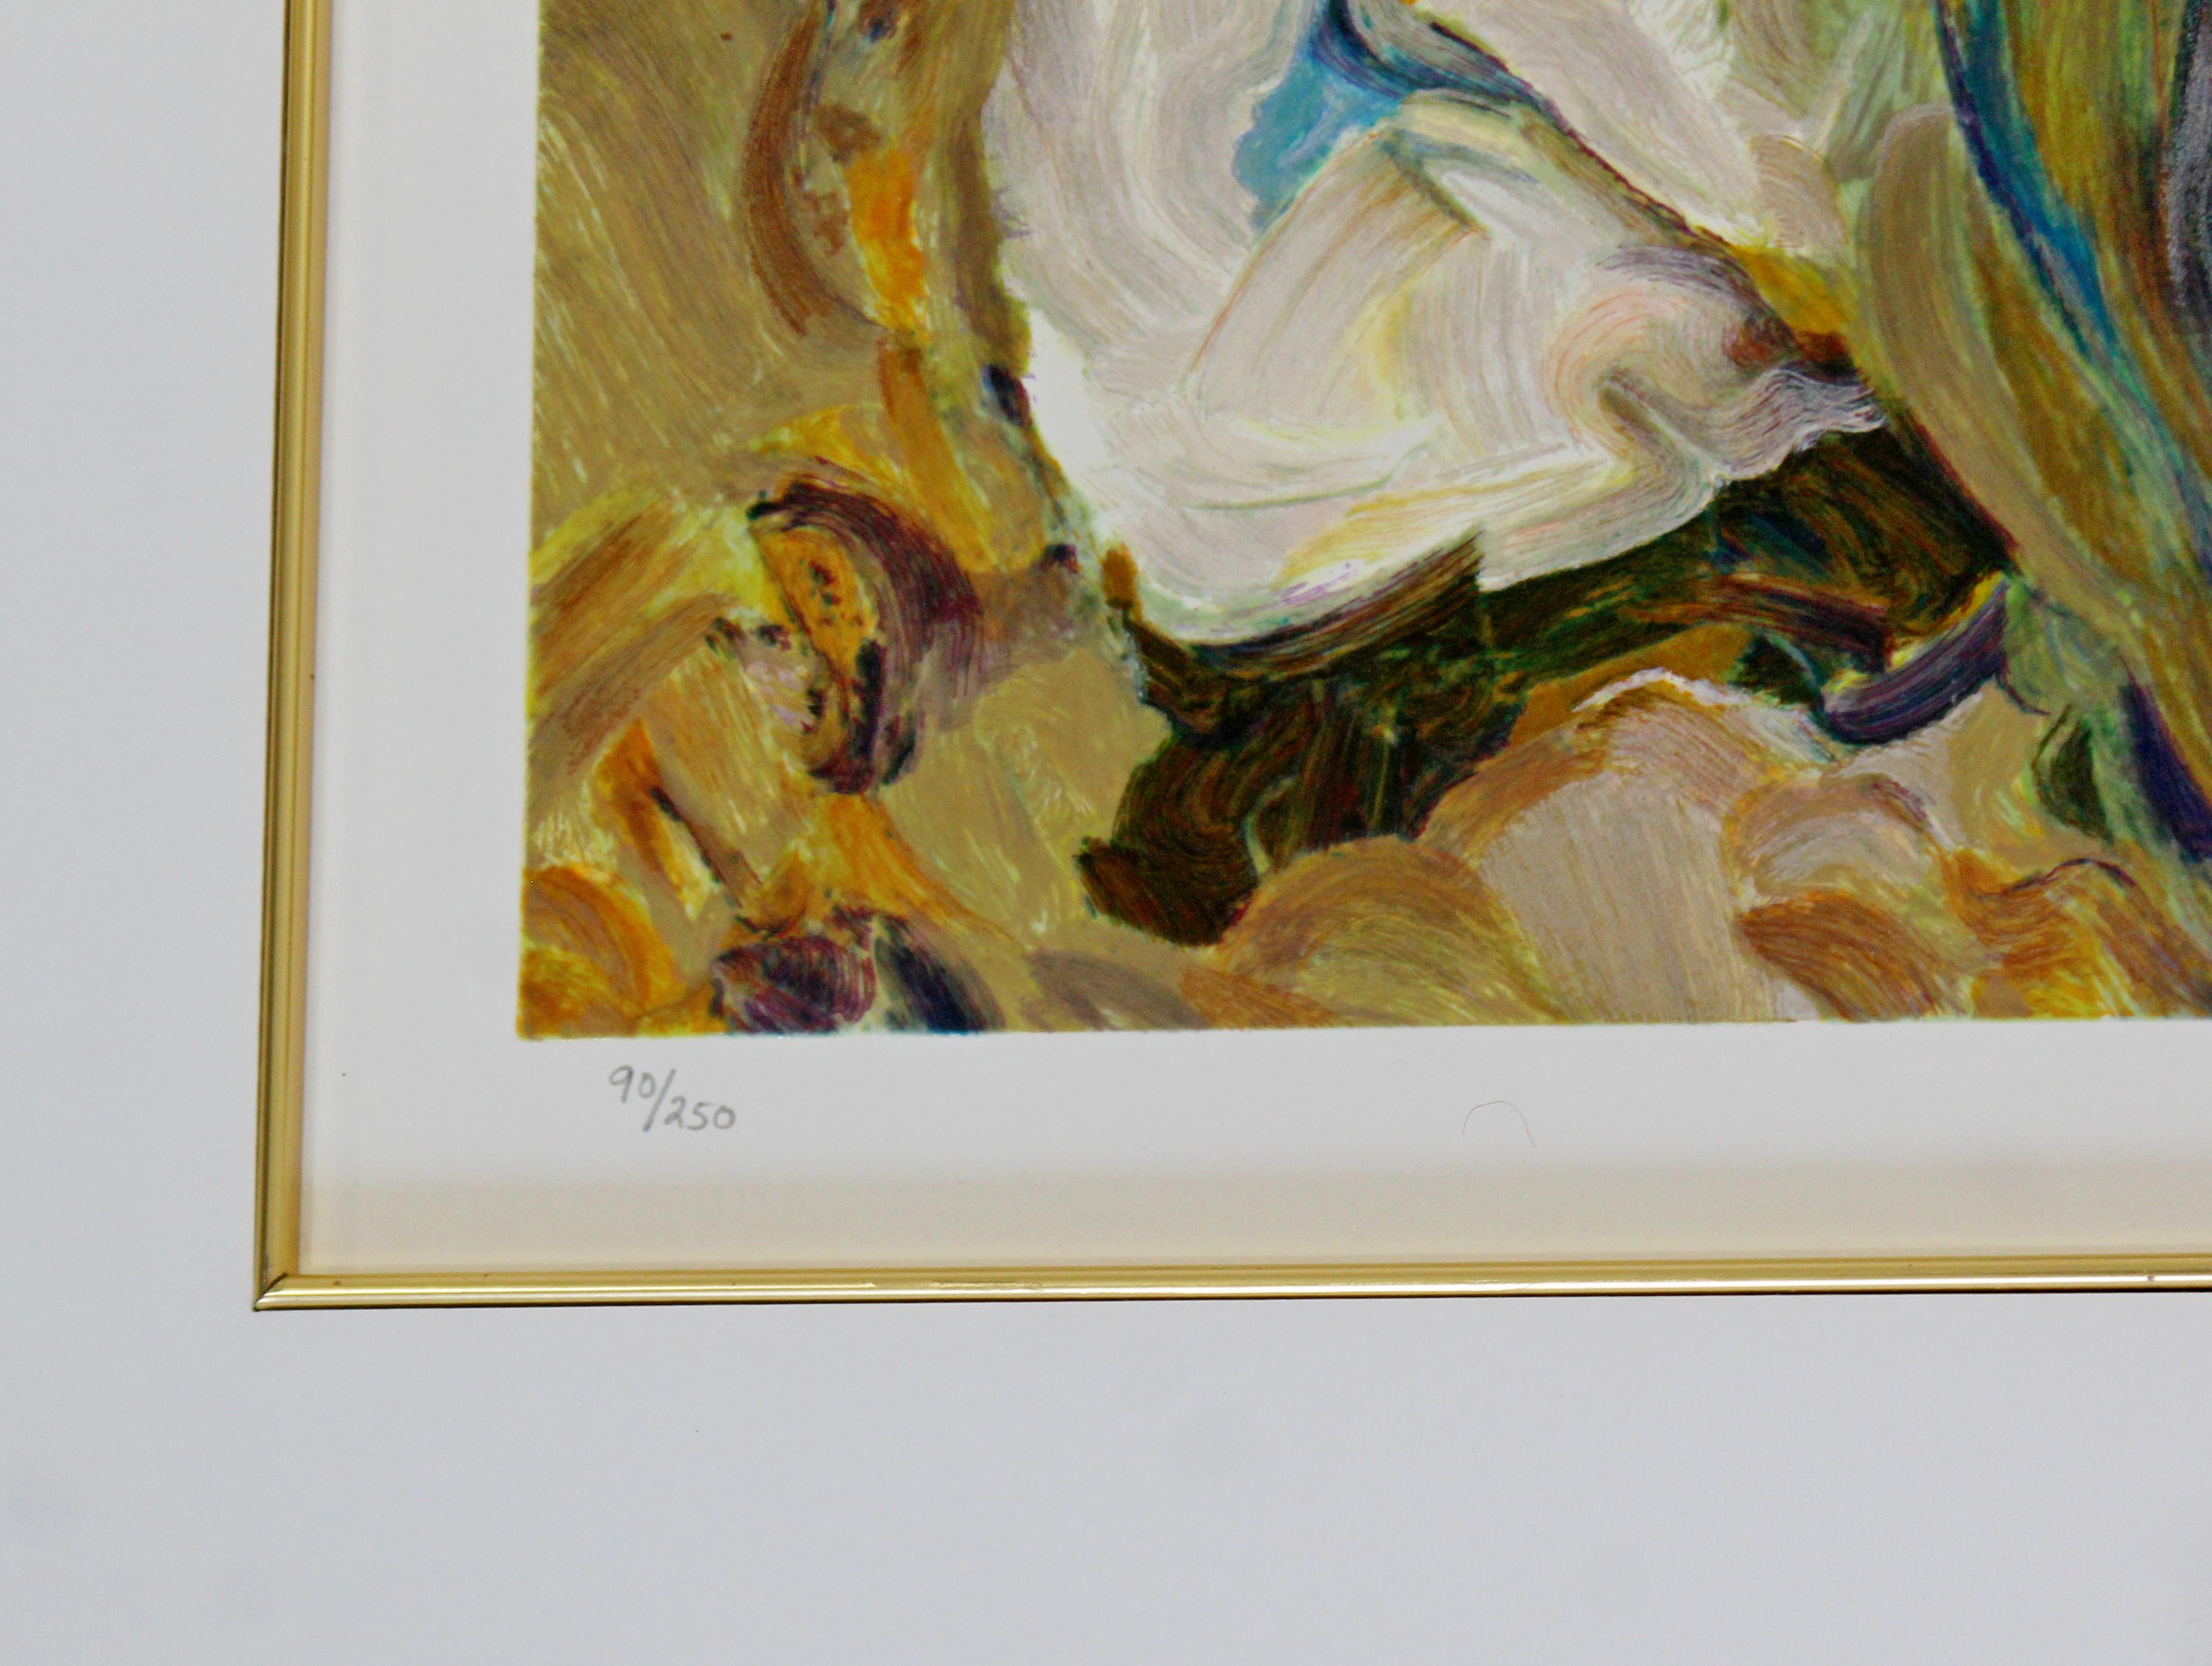 Traditional Framed Jose Royo Signed Serigraph 2 Women Yellow Dress 90/250 For Sale 1